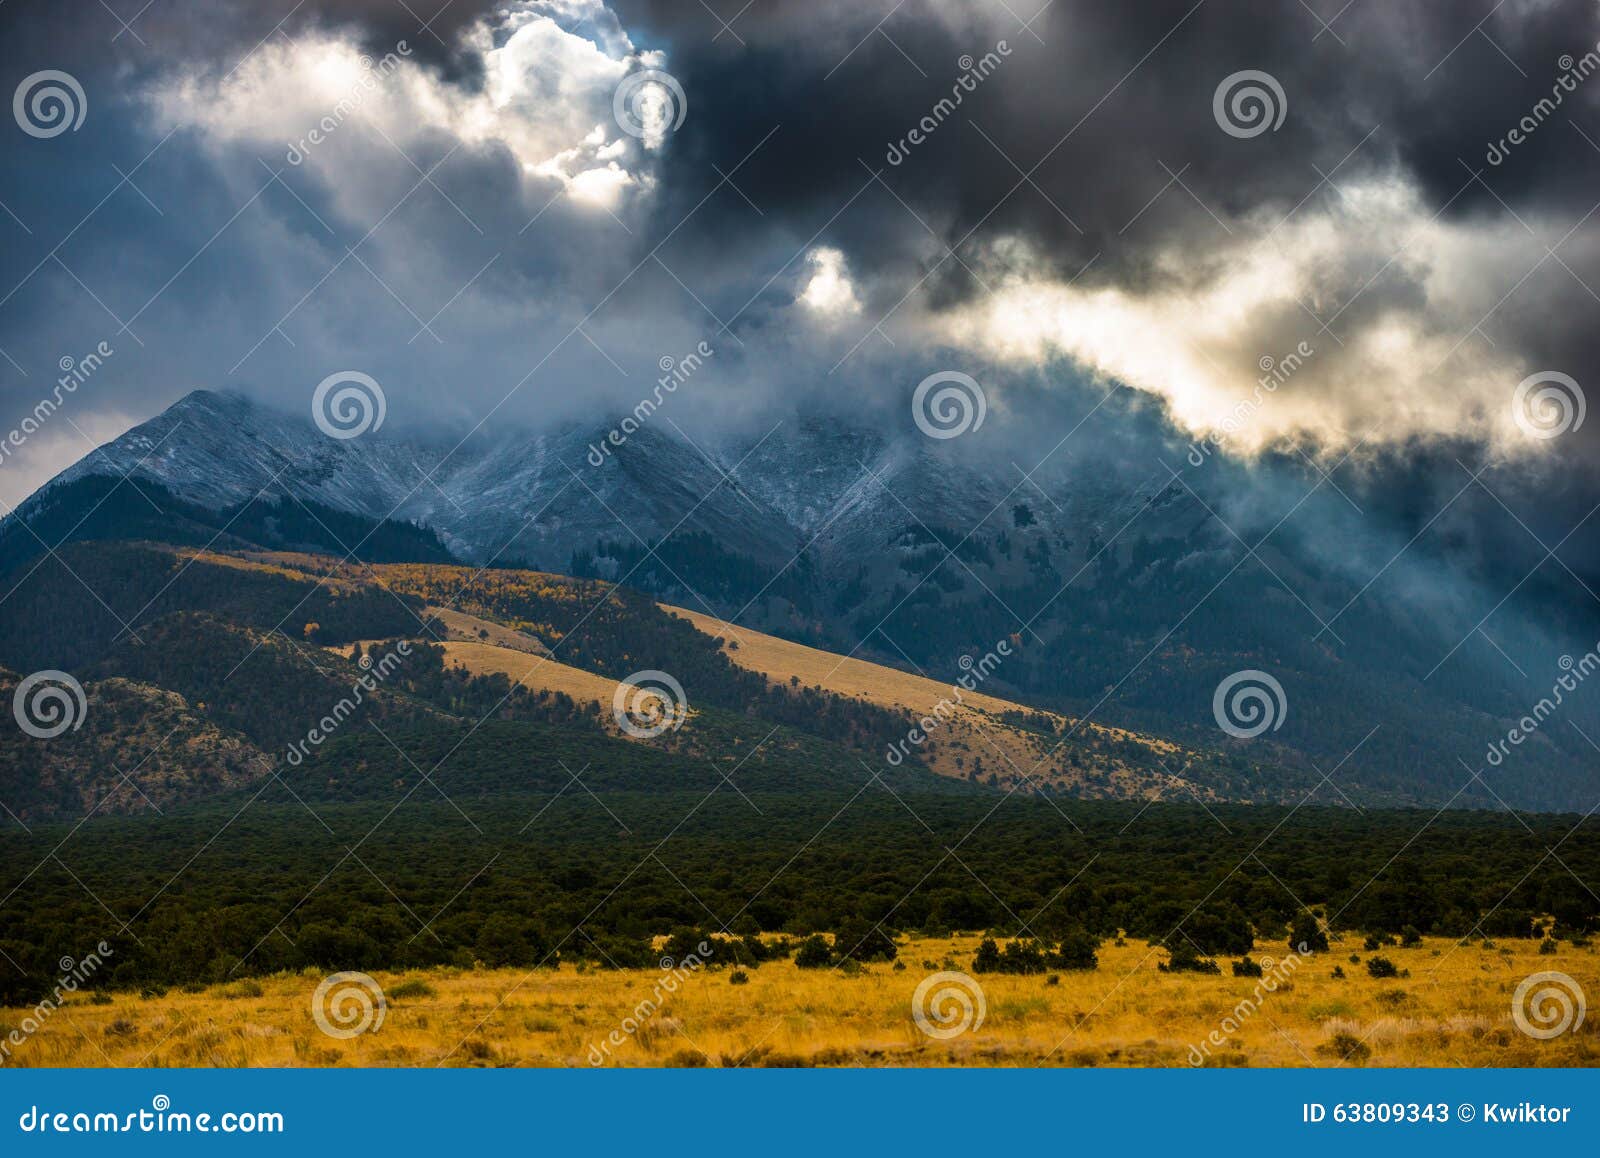 sun shining through the dark clouds over the mountains sand dune